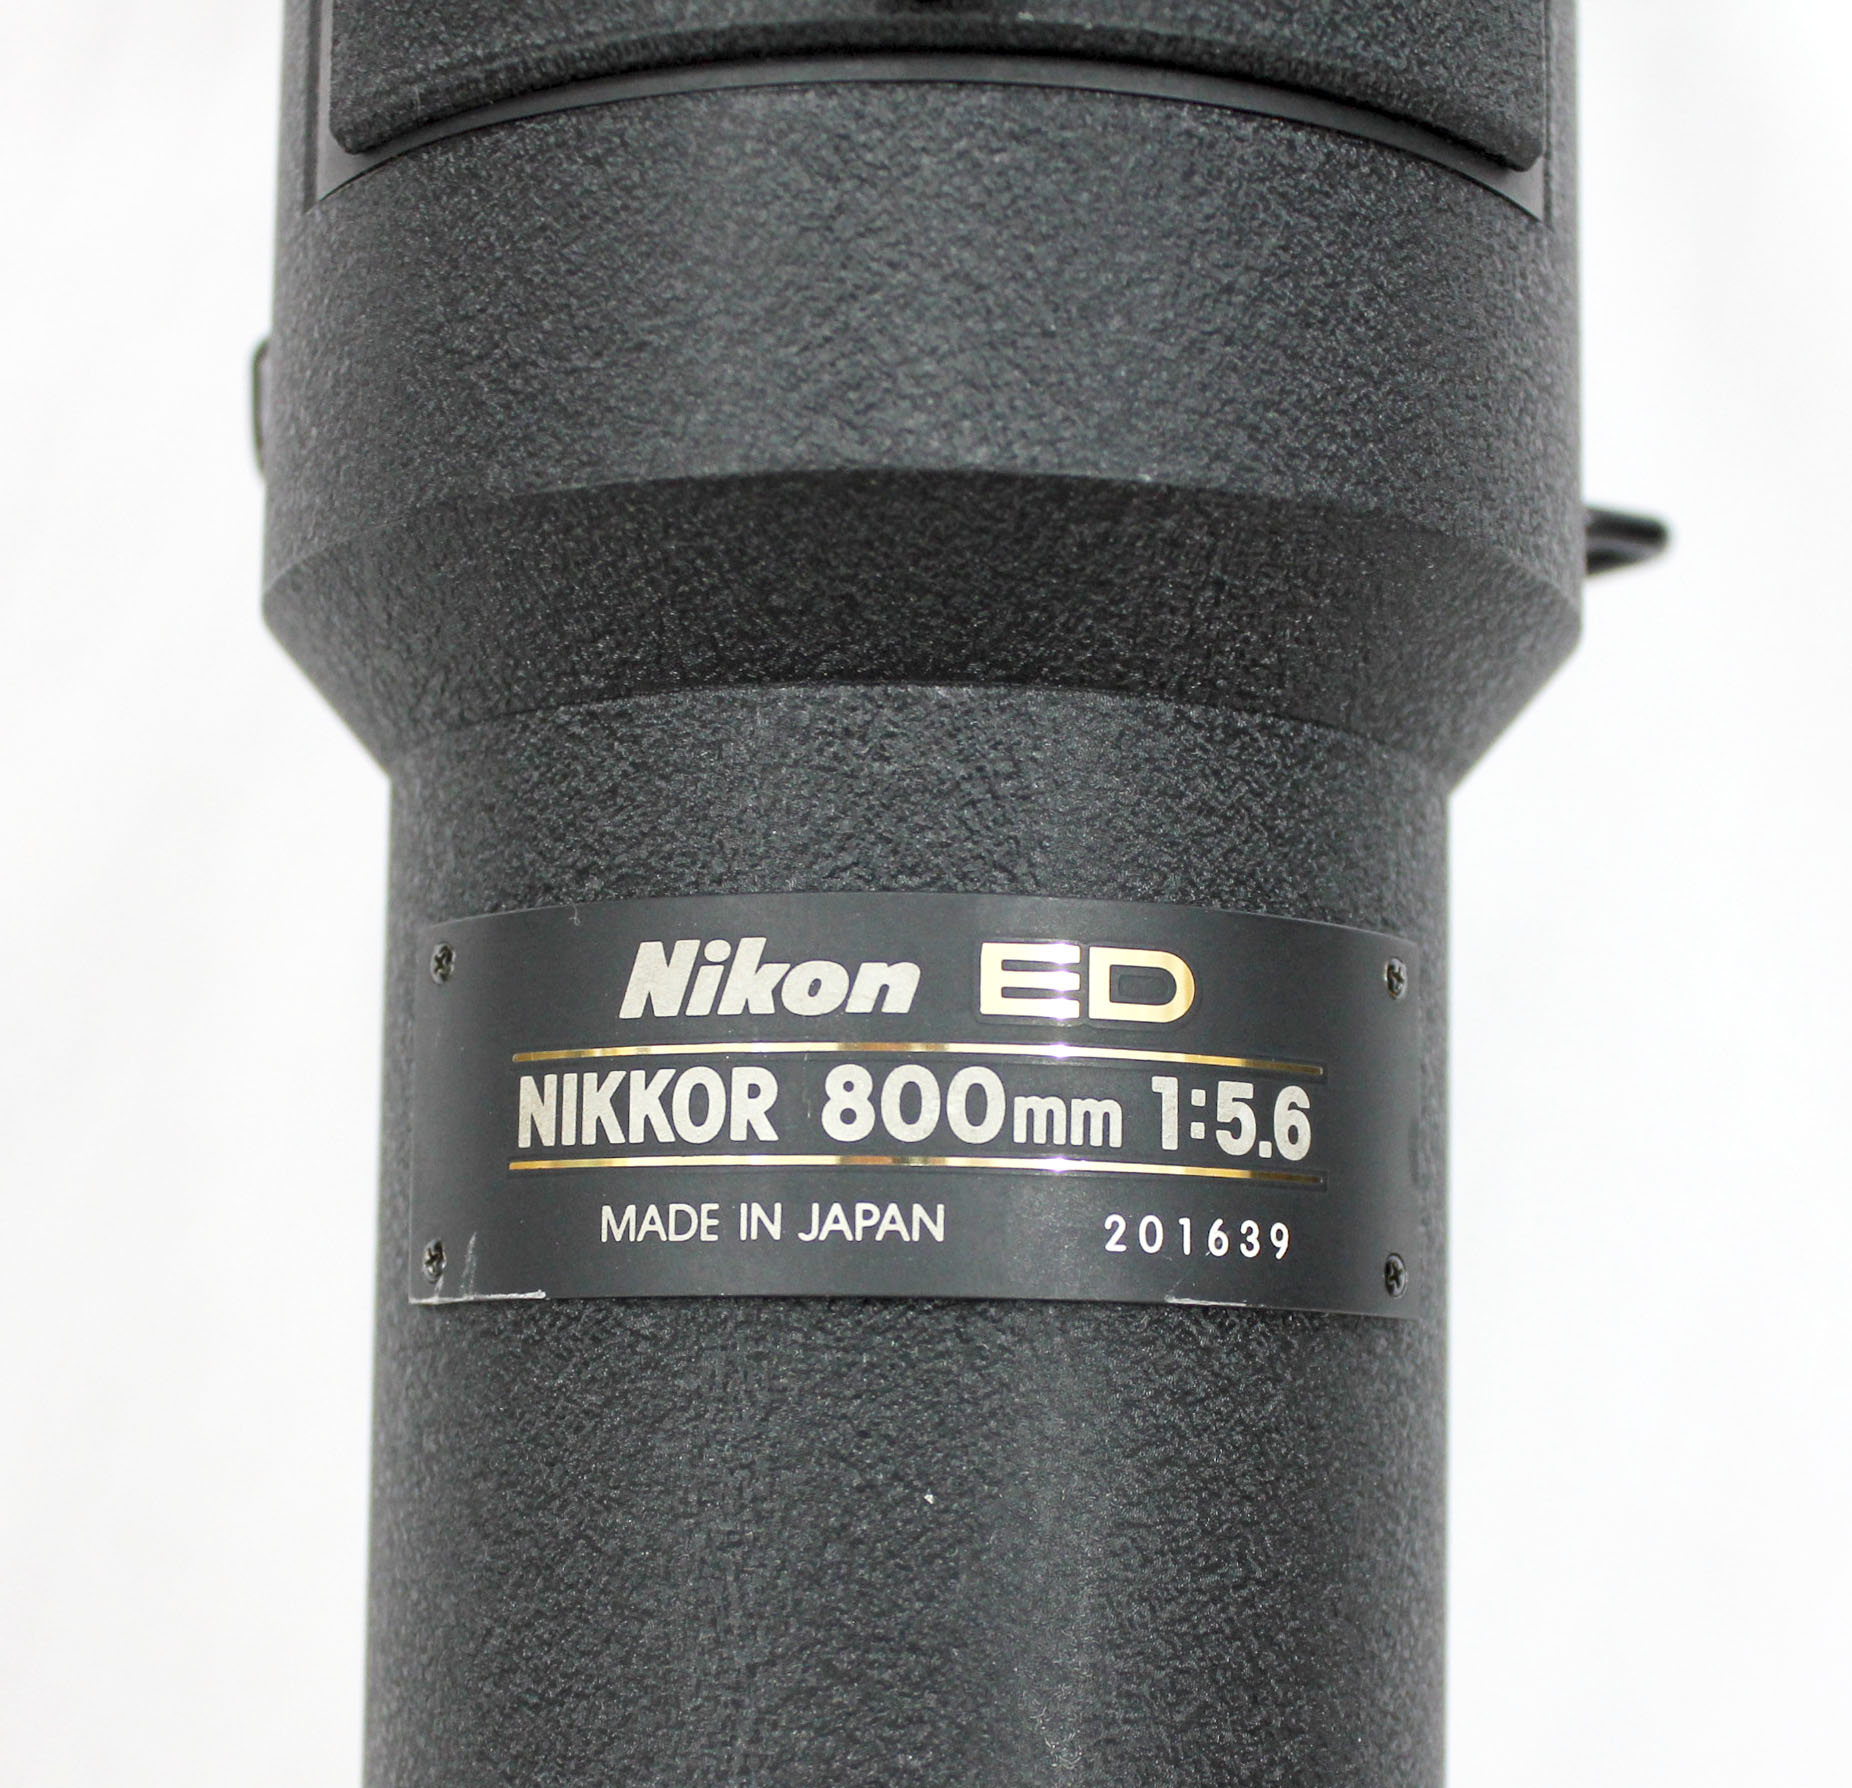  Nikon Ai-s Ais Nikkor ED 800mm F/5.6 IF Telephoto Lens in Case from Japan Photo 6